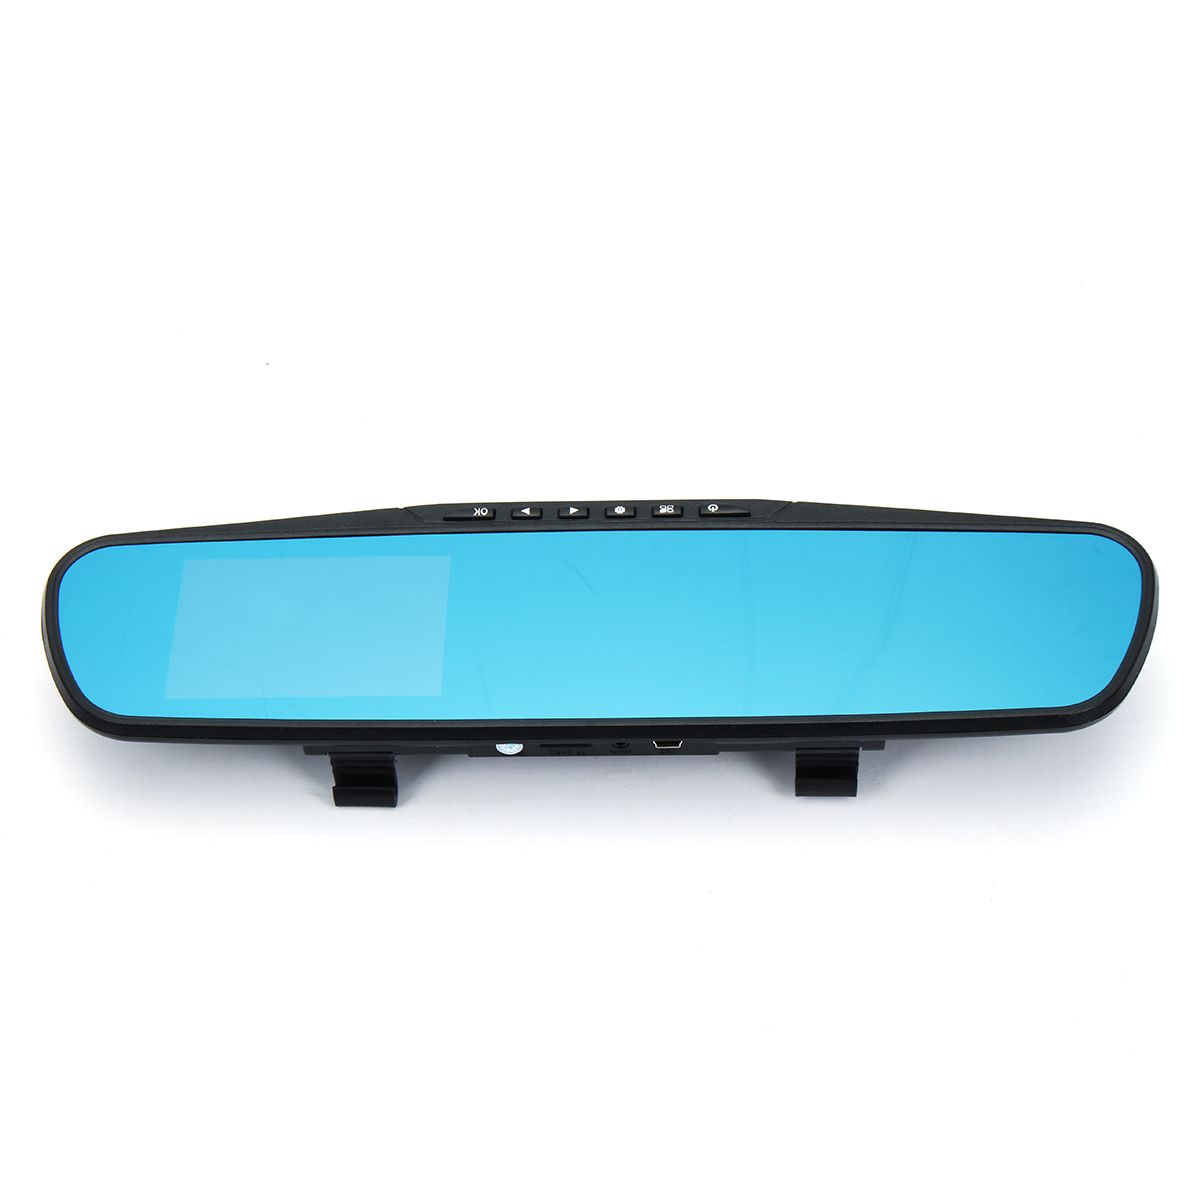 35-Inch-HD-1080P-Rearview-Mirror-Driving-Camera-Vedio-DVR-With-4-Fixed-Focal-Lens-1242300